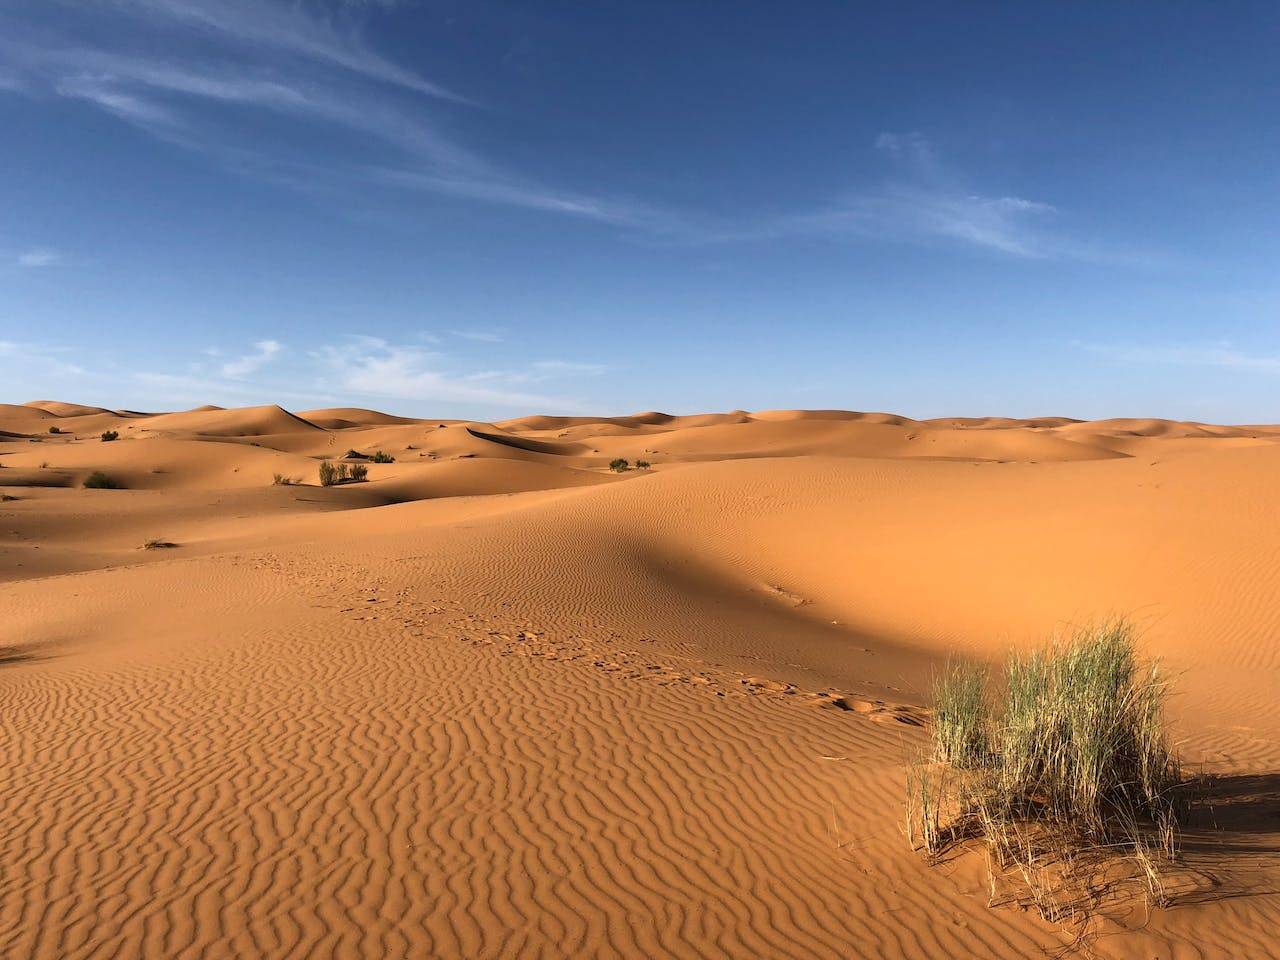 You are currently viewing Camping in the Sahara Desert: Why It’s Not Recommended